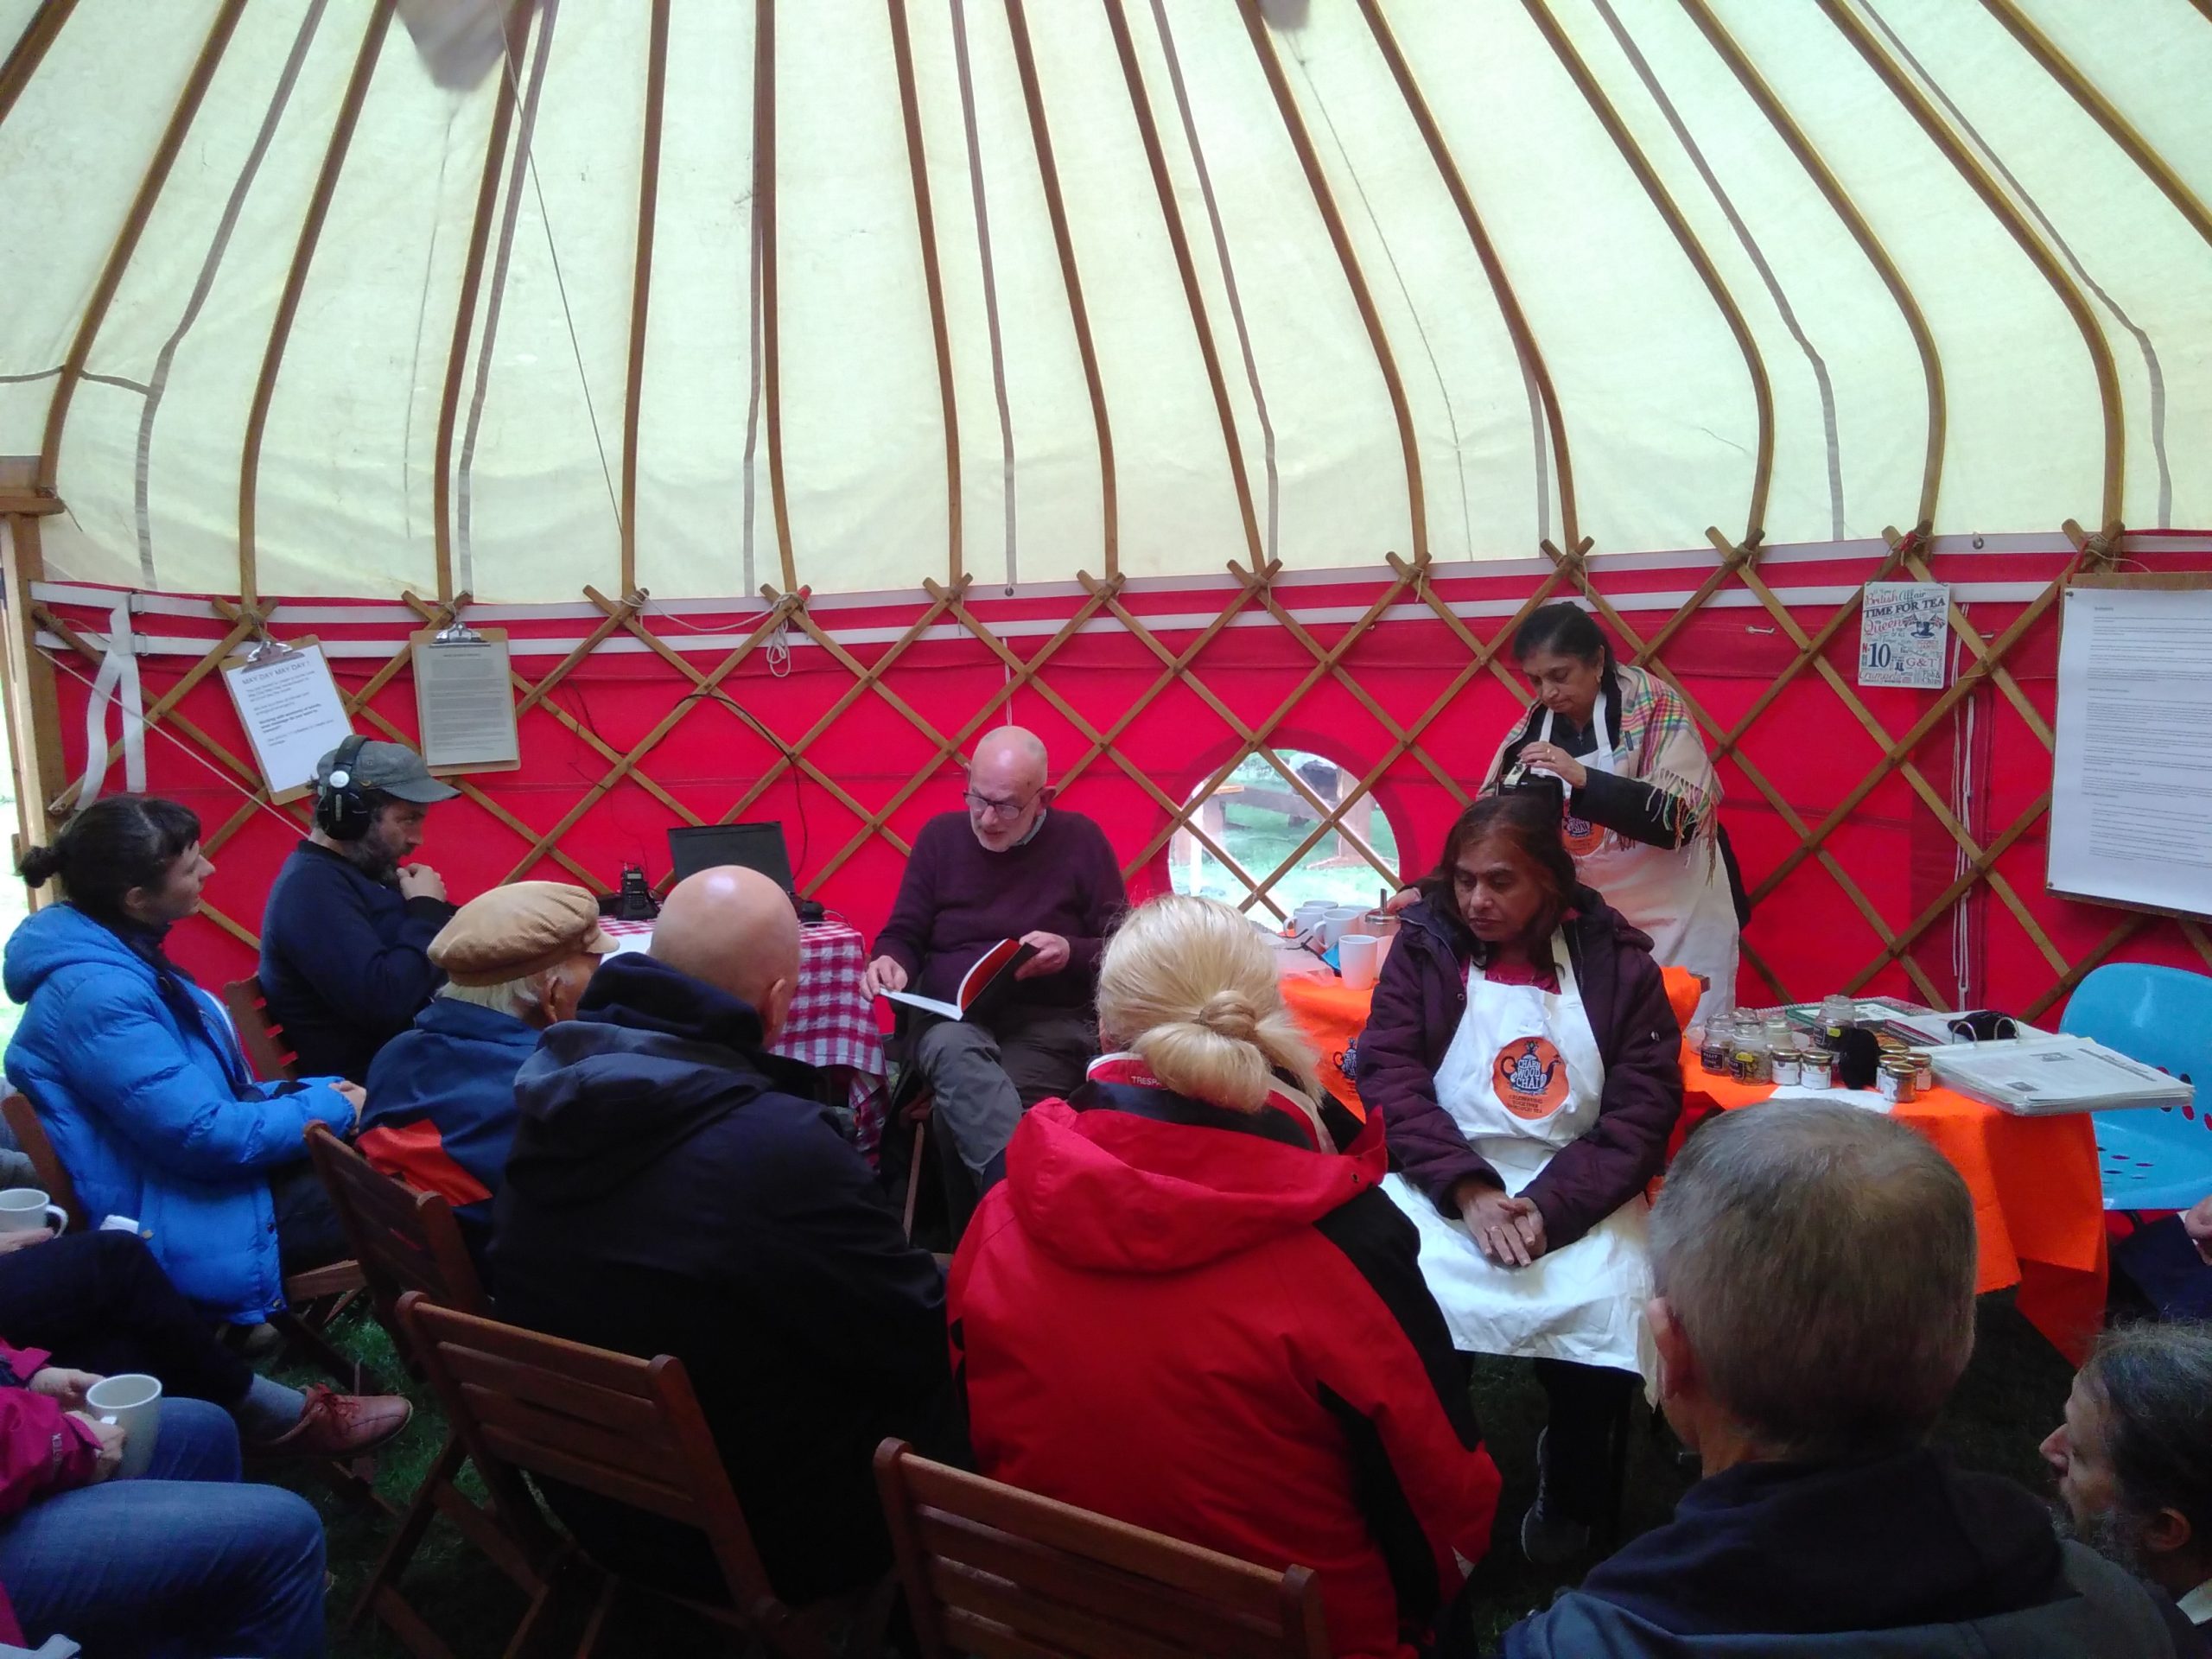 People sitting inside a yurt listening to another person talk